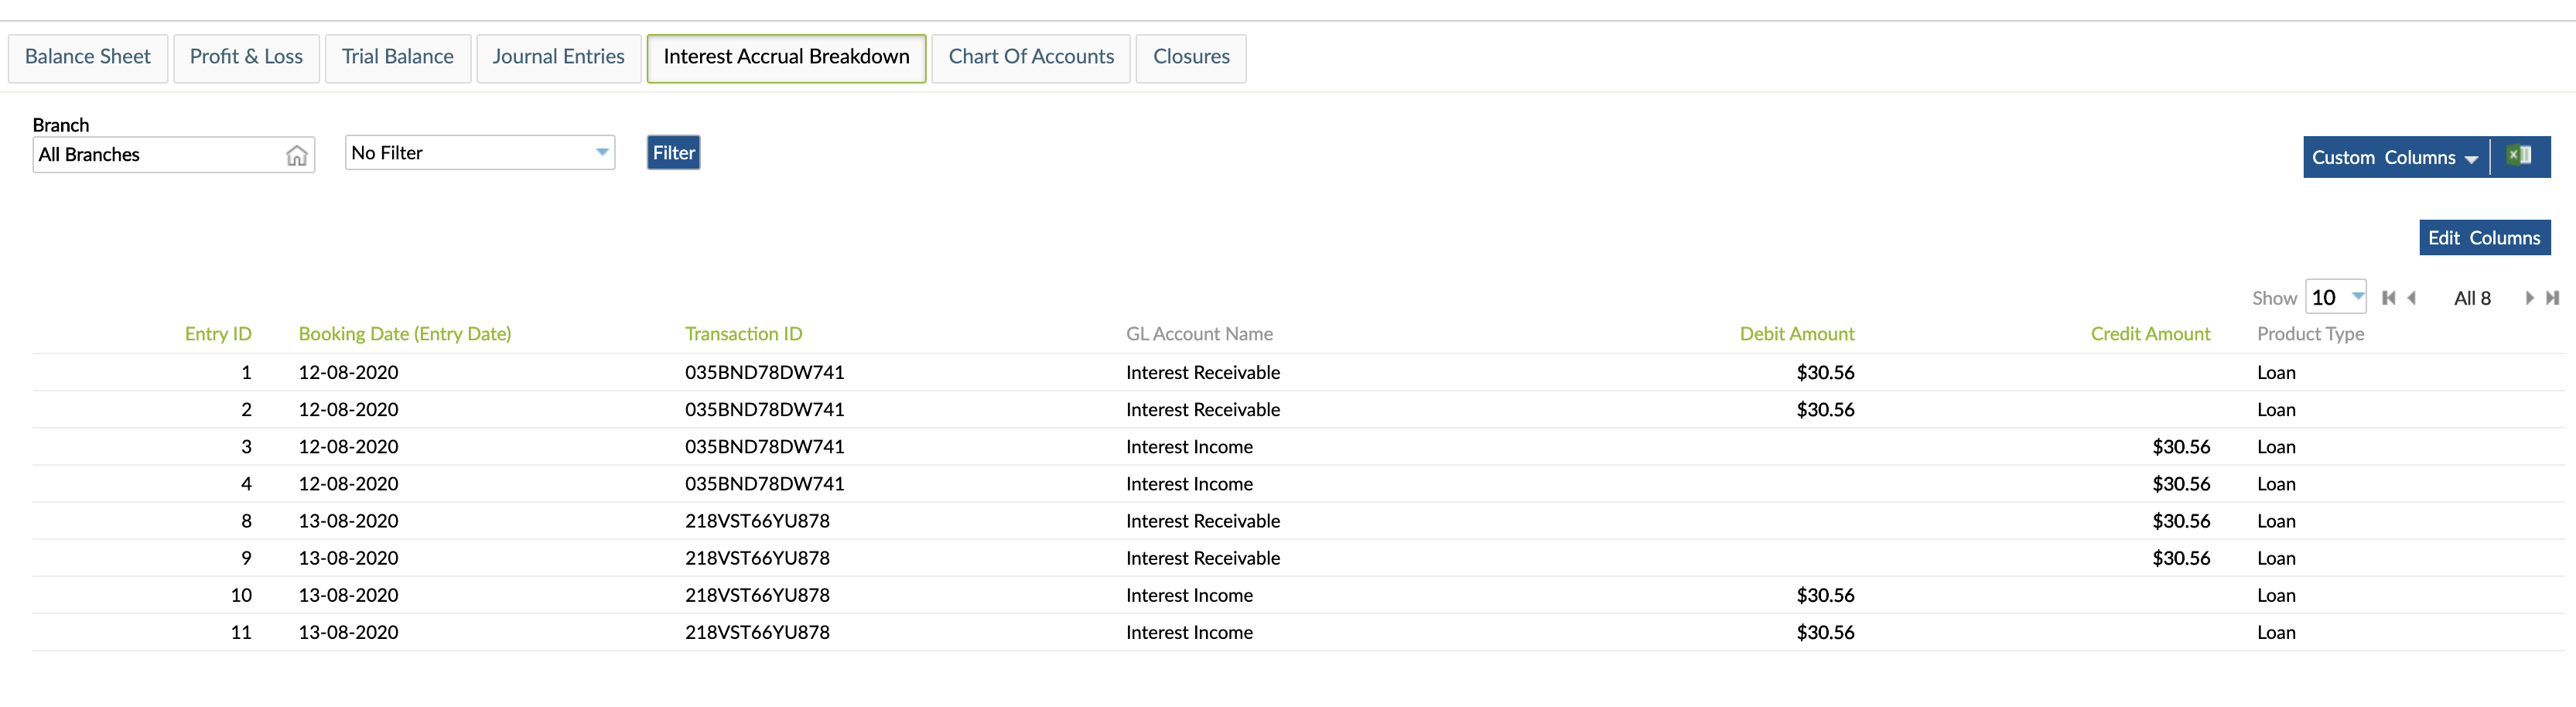 Interest Accrual Breakdown tab under Accounting